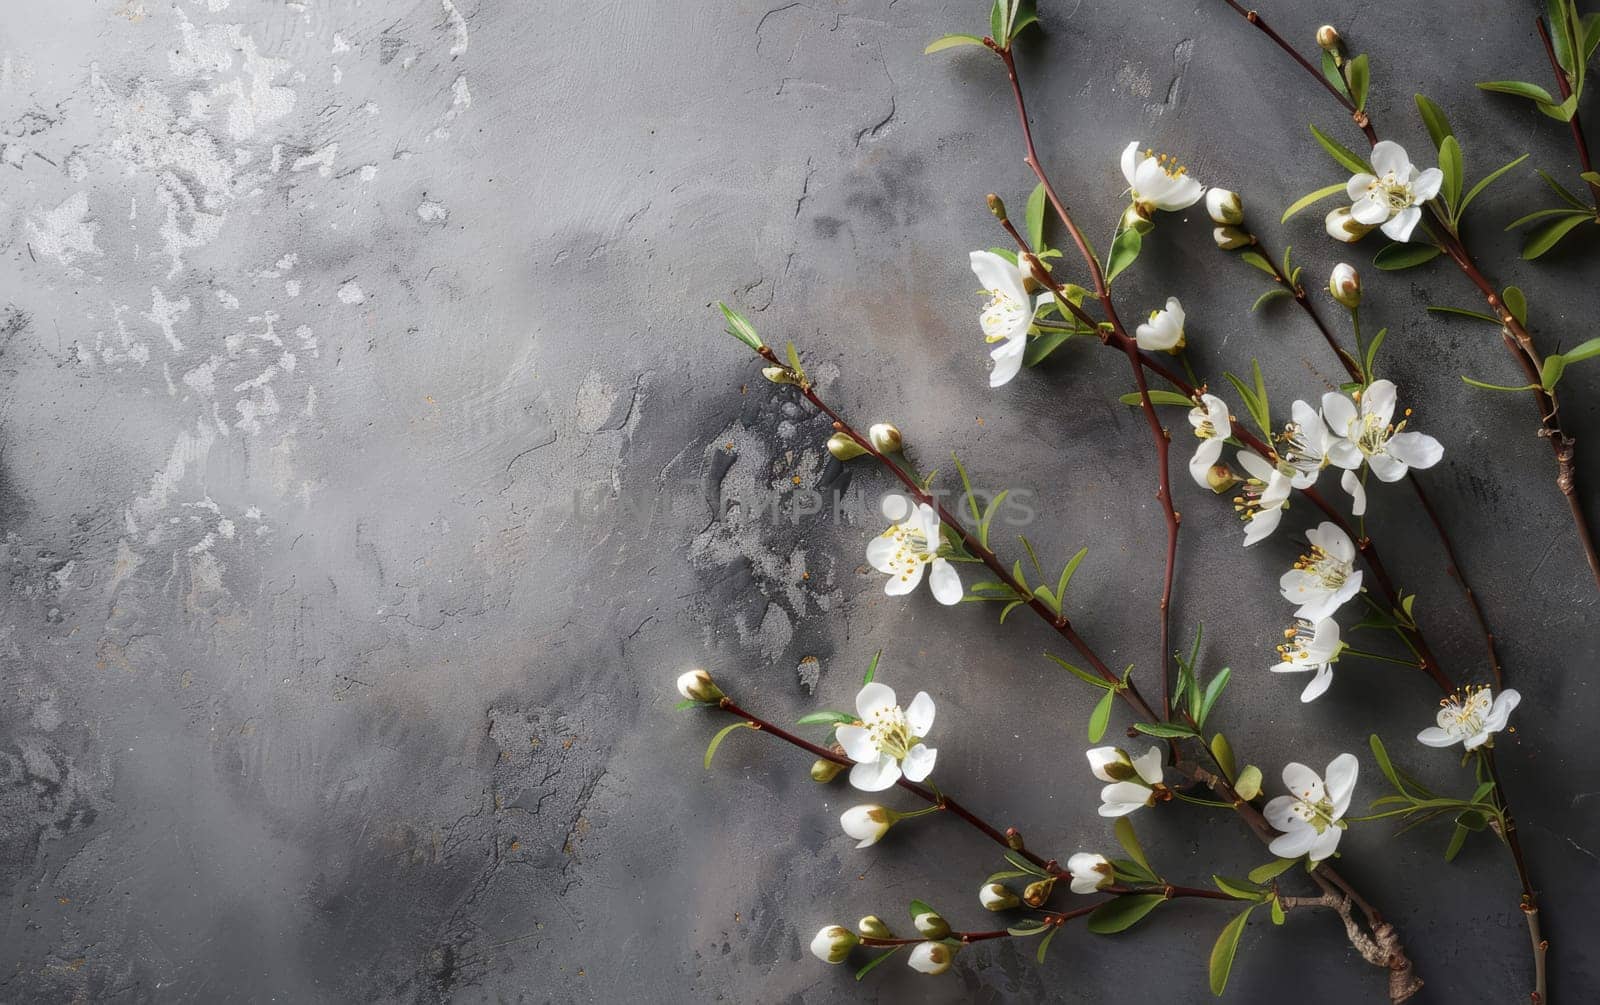 Delicate white spring blossoms are laid out across a rugged concrete texture, creating a contrast between nature and urbanity. The blossoms offer a sense of renewal amidst the stark grey background.